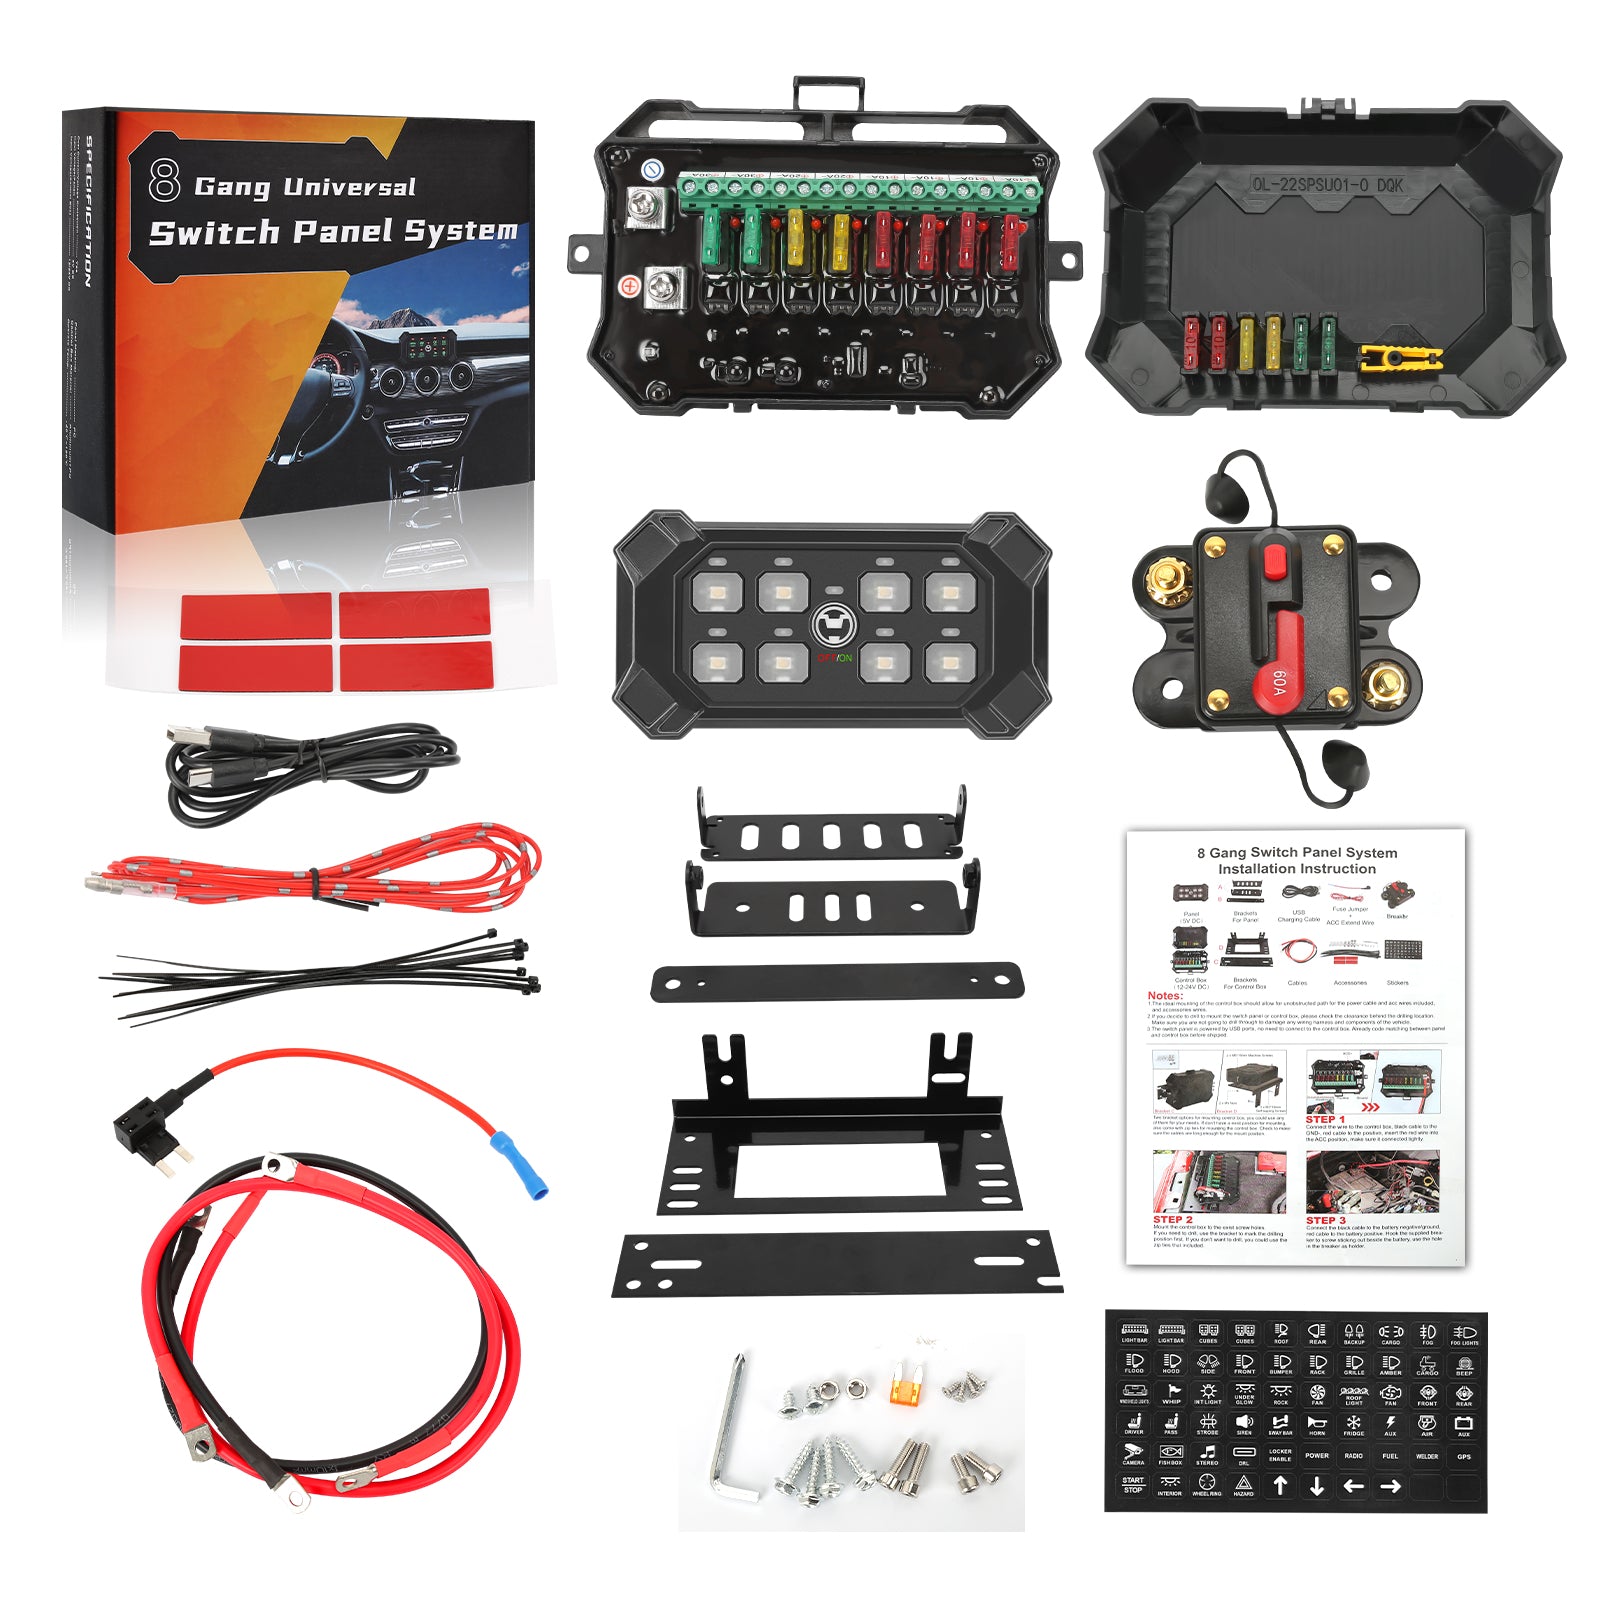 8-gang switch panel package include